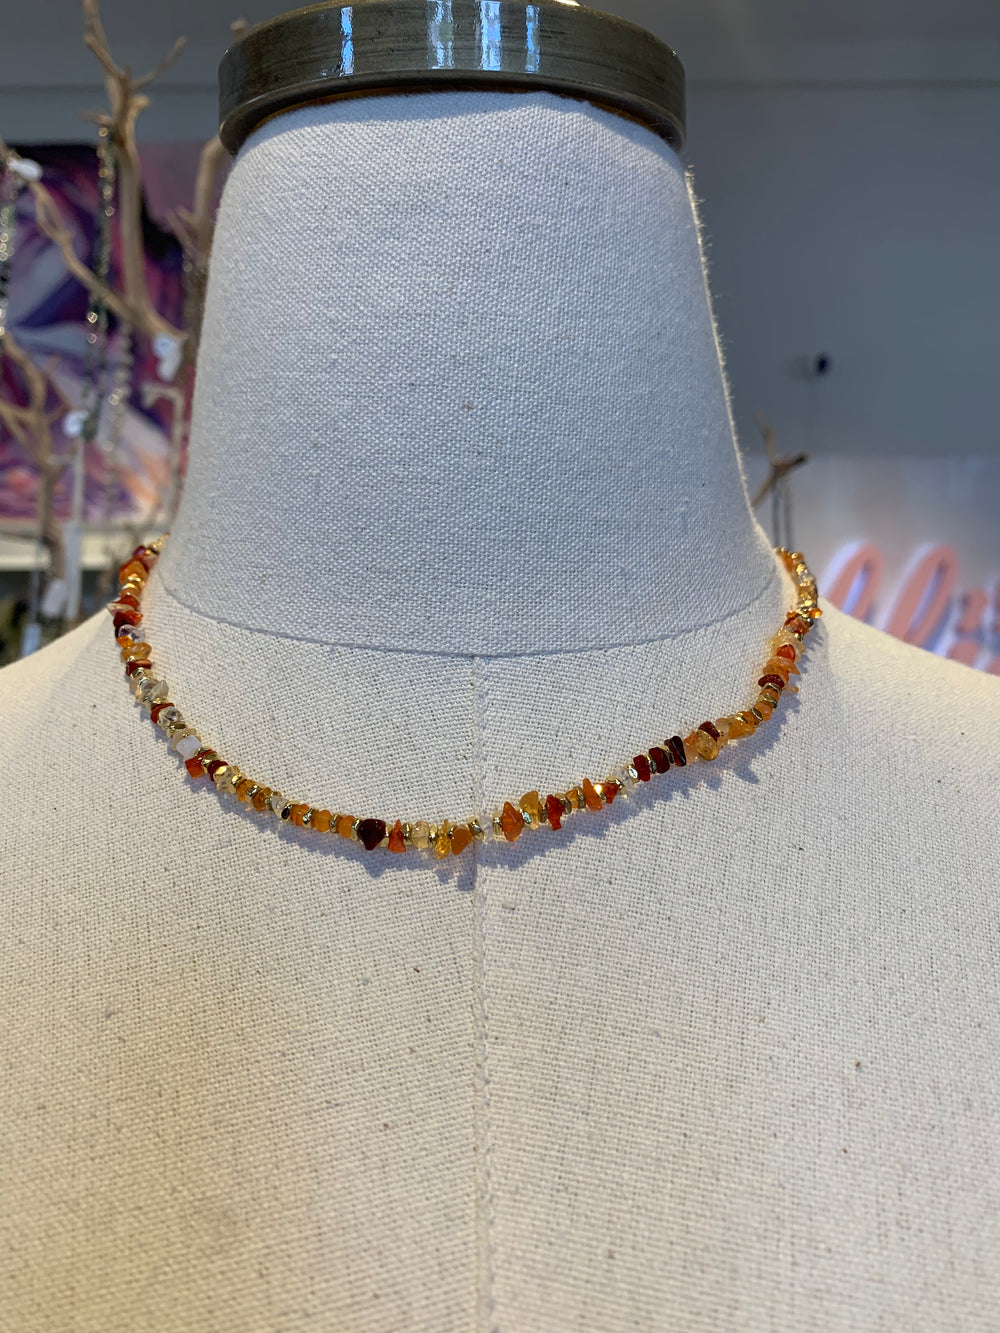 Pacific Fire Opal Necklace